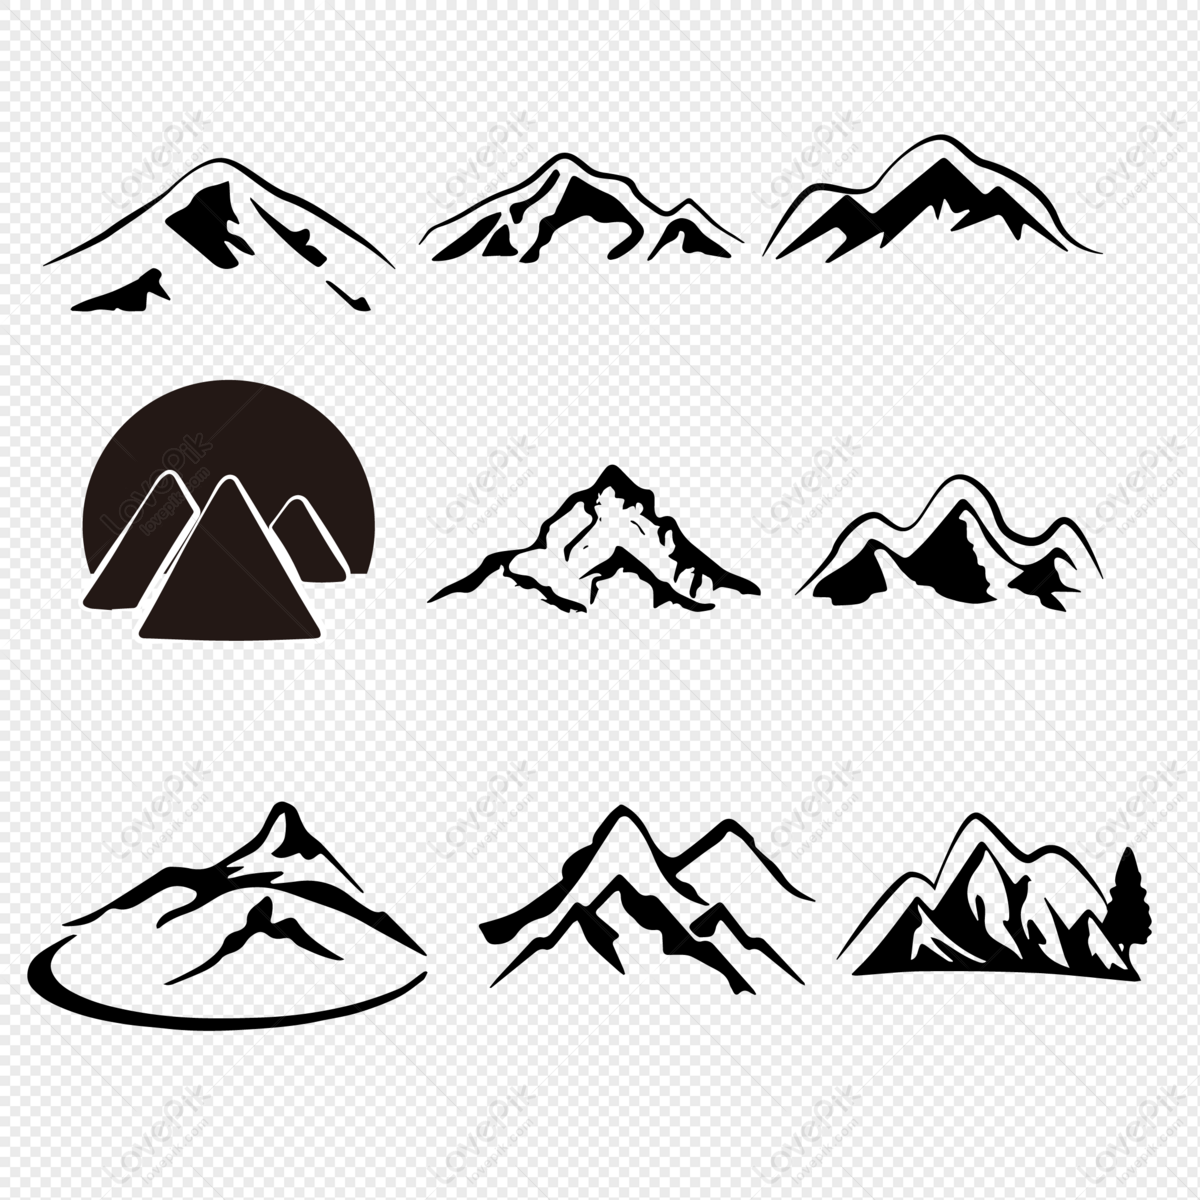 Mountain silhouette, black and white, mountain, vector png white transparent